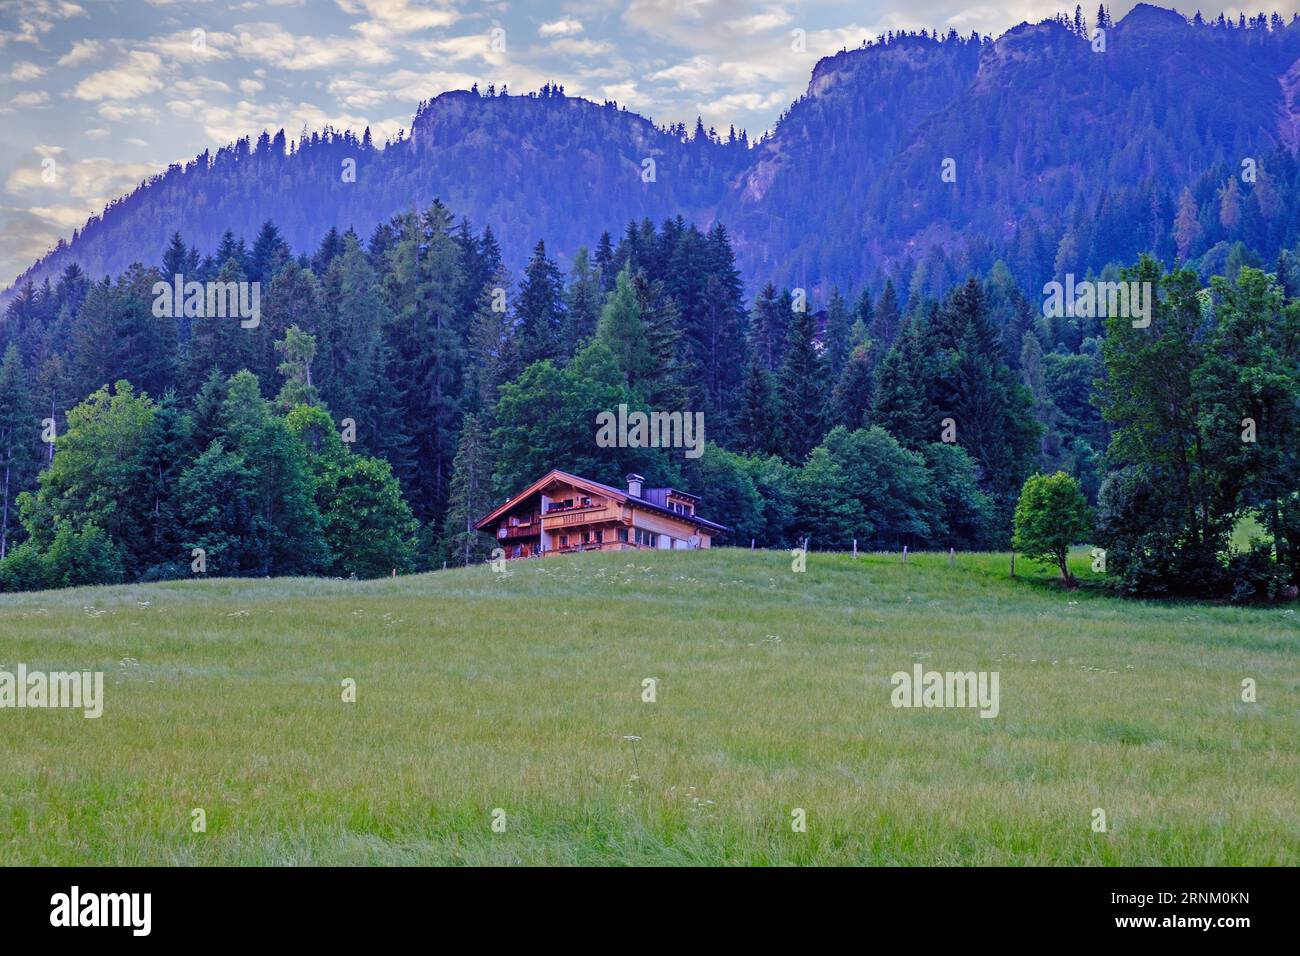 Traditional wooden Alpine house in a field with tall trees & mountains. Alpbach, village in Tyrol, Western Austria. Stock Photo